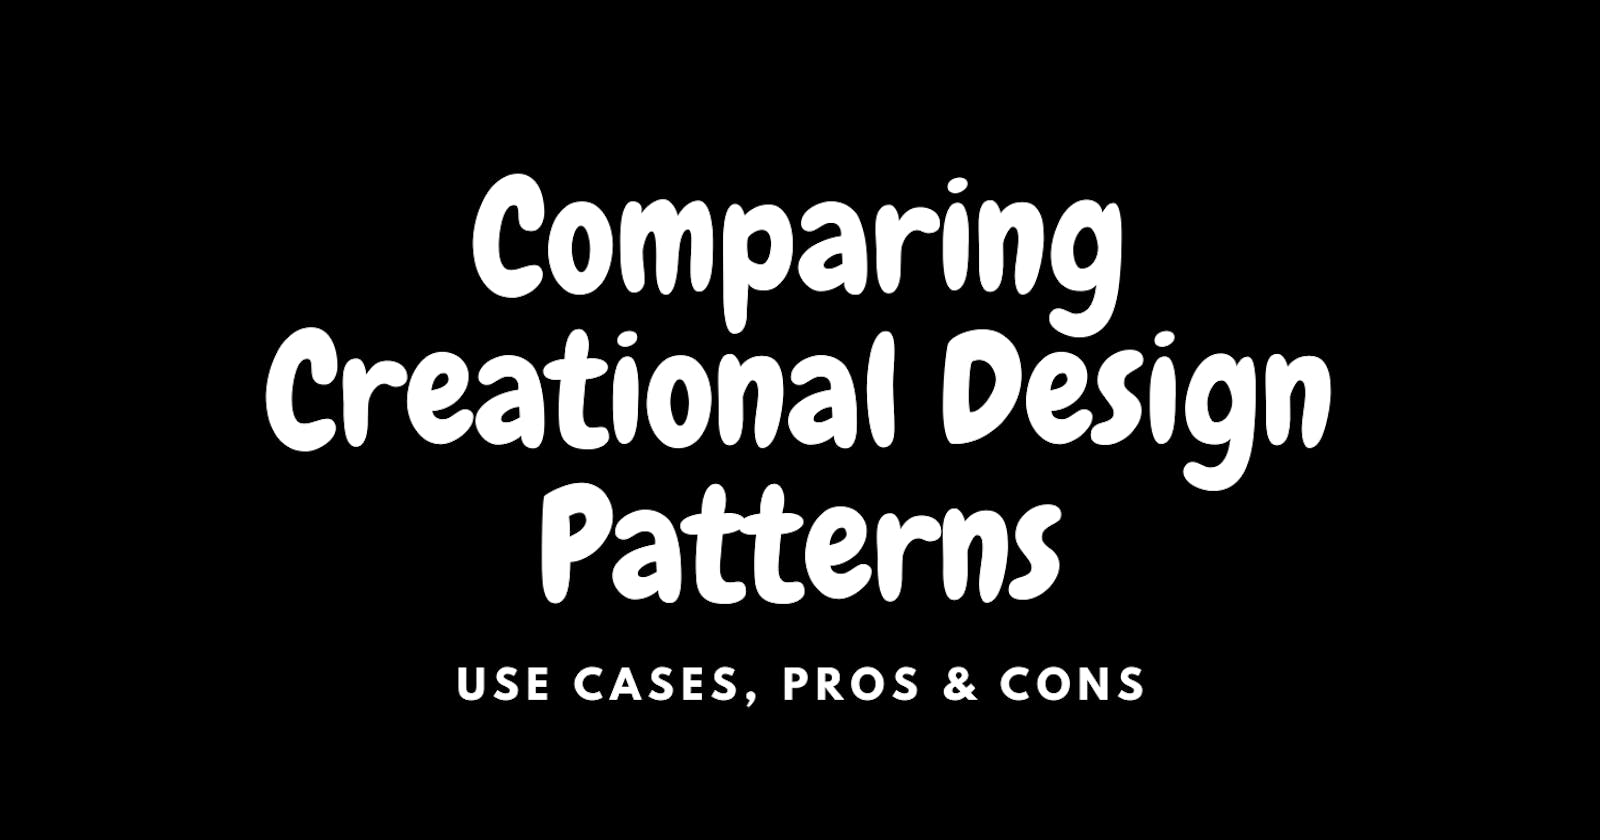 Comparing Creational Design Patterns: Use Cases, Pros, and Cons